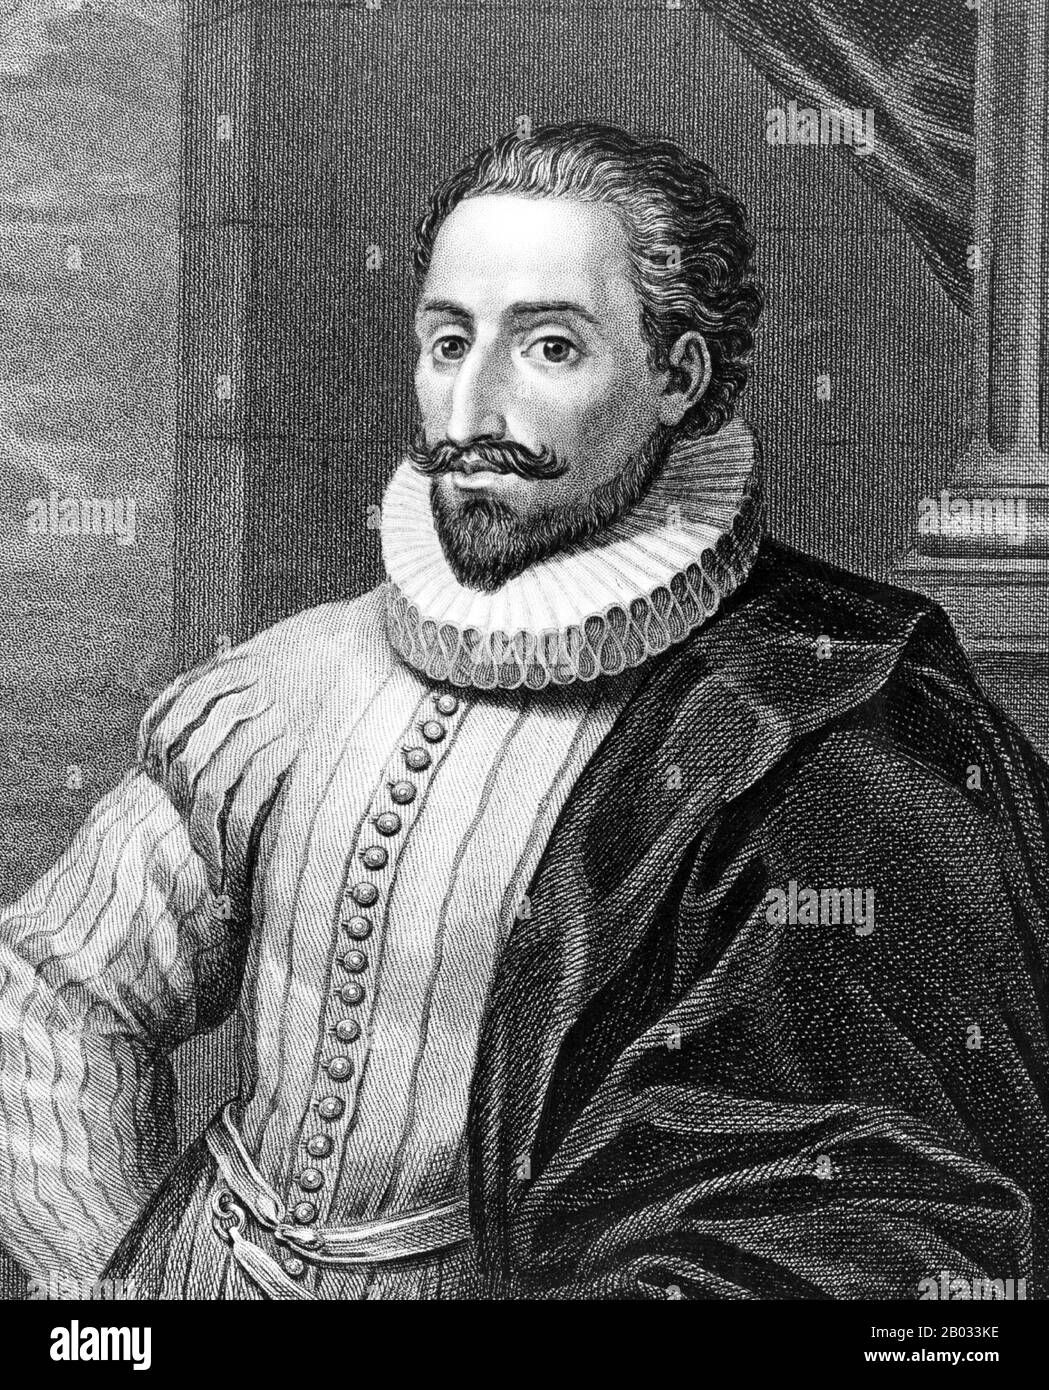 Miguel de Cervantes (29 September 1547 – 22 April 1616), is widely regarded as the greatest writer in the Spanish language and one of the world's pre-eminent novelists.  His major work, Don Quixote, considered to be the first modern European novel, is a classic of Western literature, and is regarded amongst the best works of fiction ever written. His influence on the Spanish language has been so great that the language is sometimes called la lengua de Cervantes ('the language of Cervantes'). Stock Photo